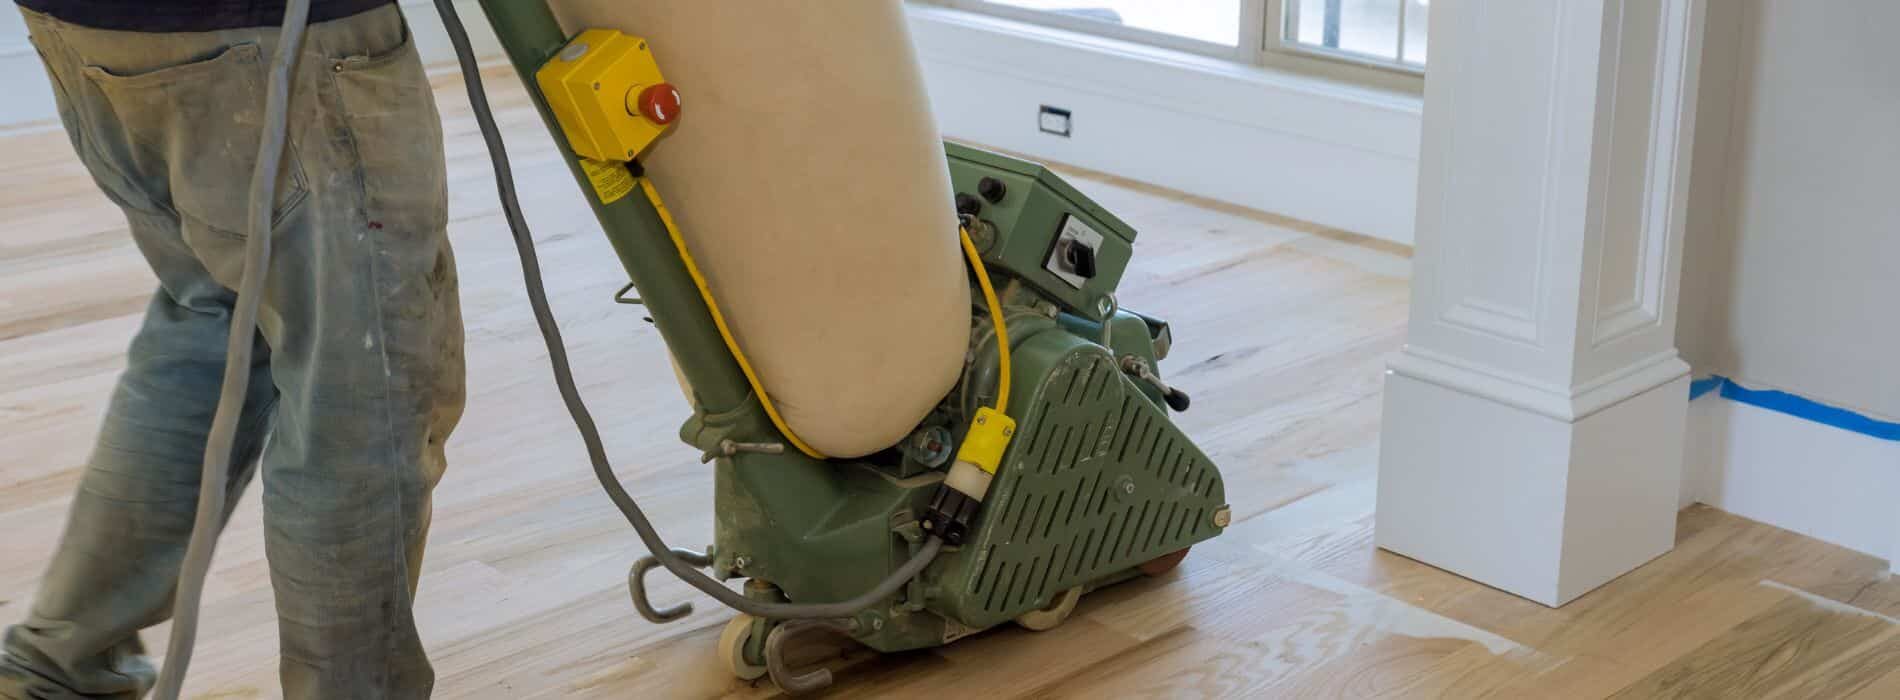 In Erith, DA18, Mr Sander® use a Bona Scorpion drum sander (200mm, 1.5kW, 240V, 50Hz) with a HEPA-filtered dust extraction system for clean and efficient sanding of parquet floors.